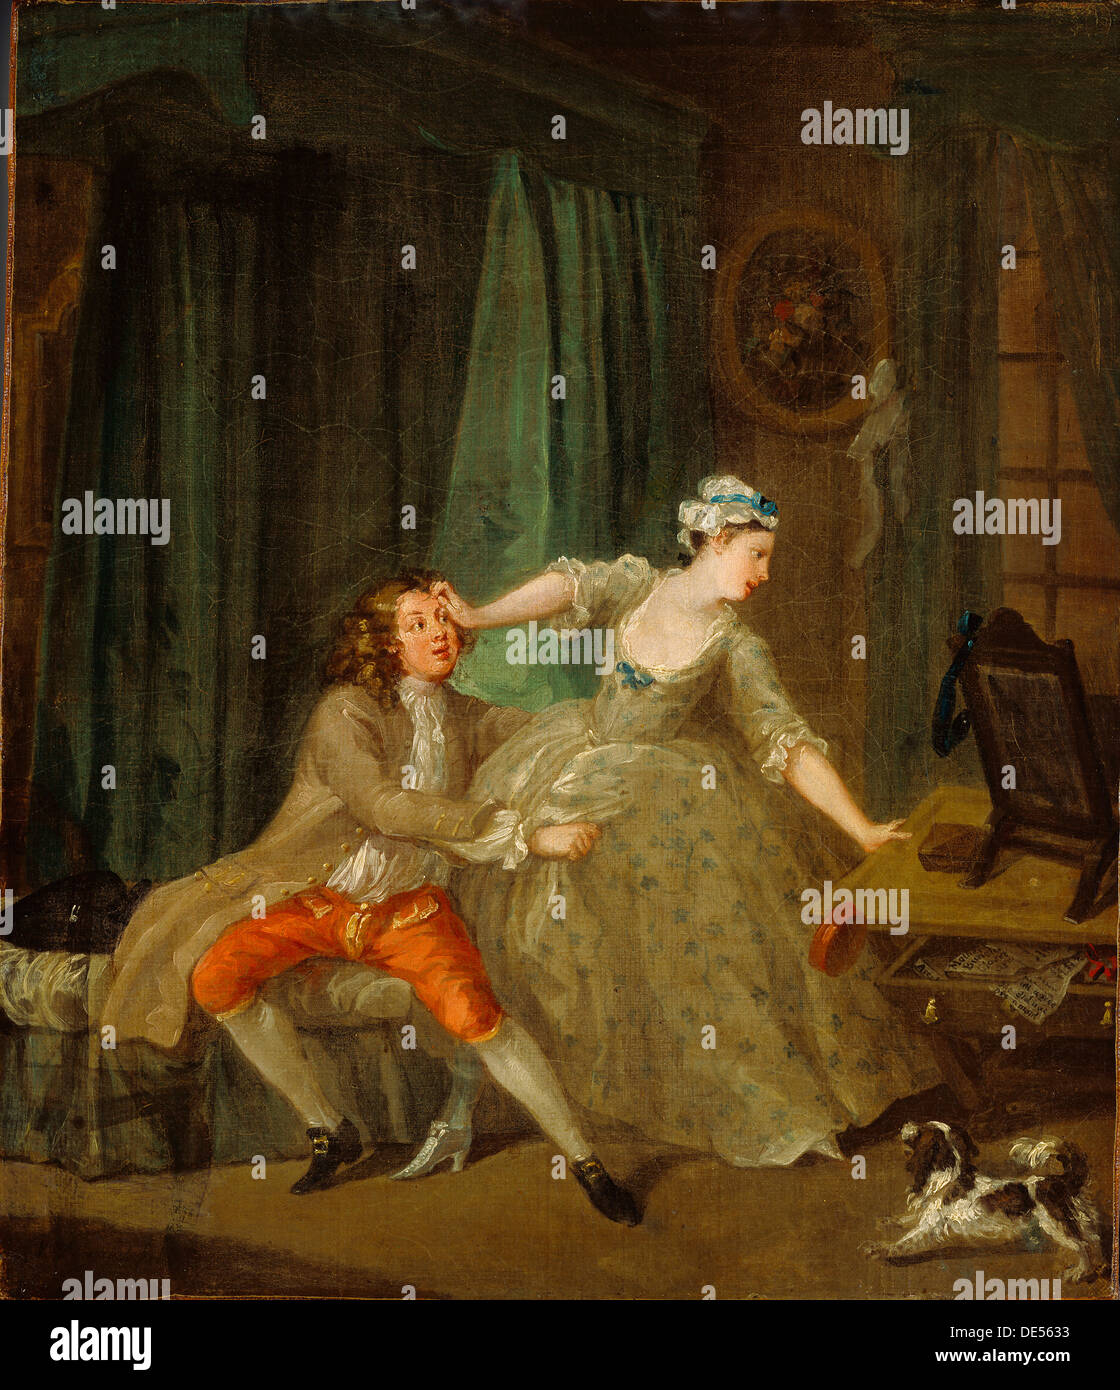 Before; William Hogarth, English, 1697 - 1764; 1730 - 1731; Oil on canvas Stock Photo